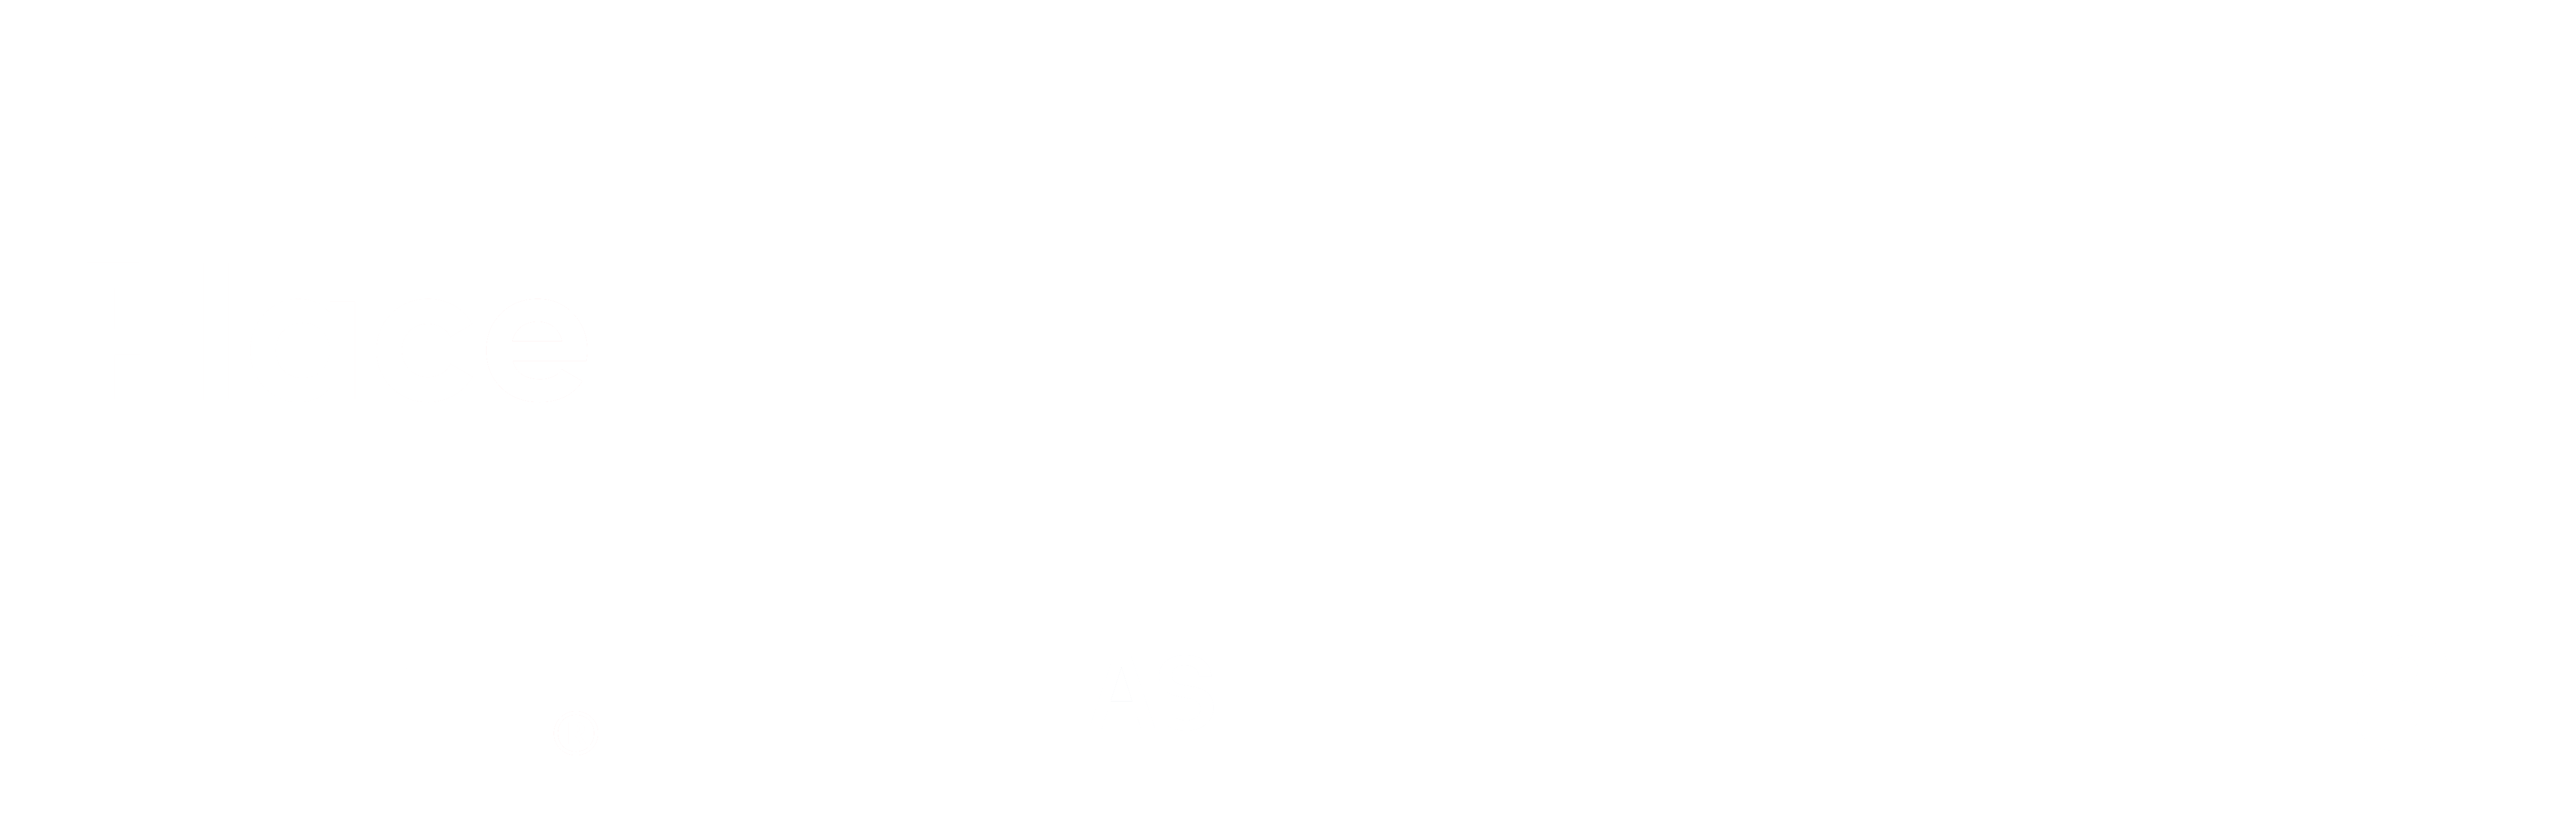 Hygeia Hospital: Awarded for its exceptional workplace conditions for a 3rd time (2018)